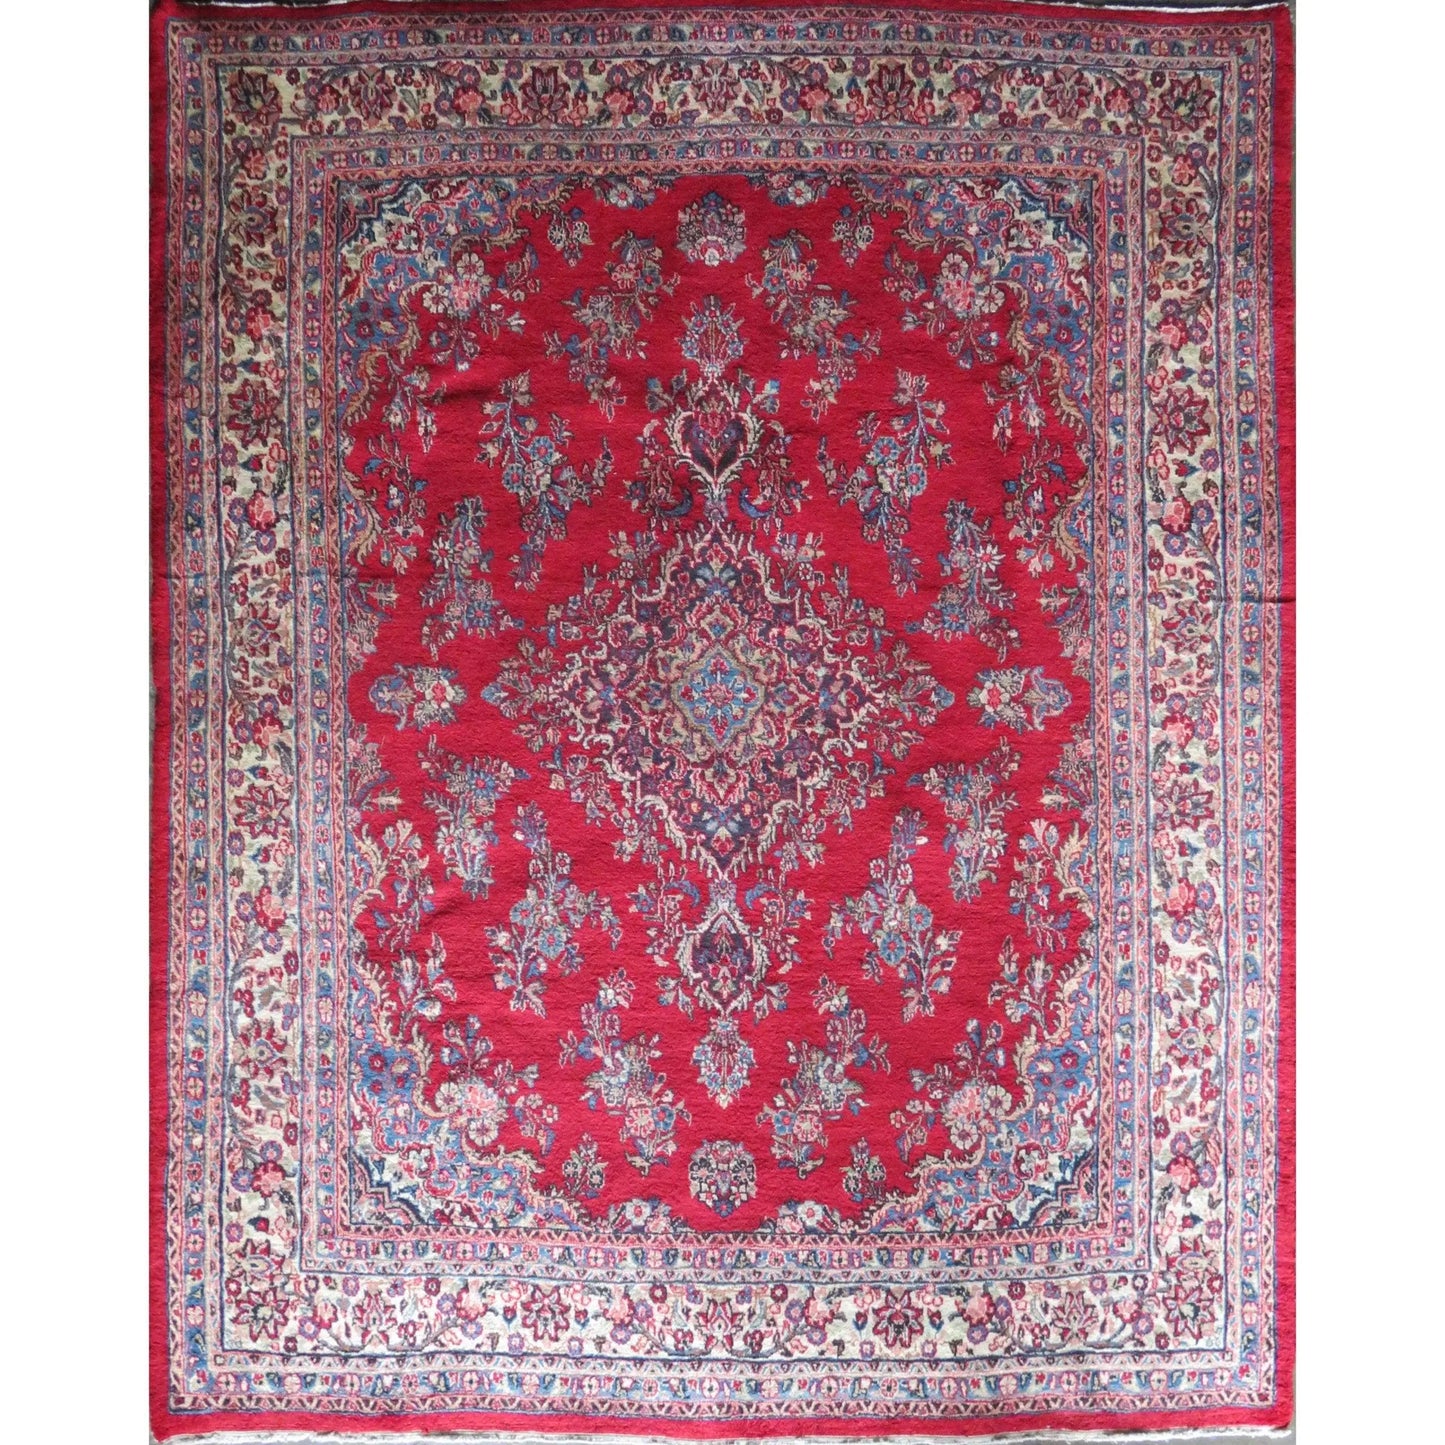 Hand-Knotted Persian Wool Rug _ Luxurious Vintage Design, 10'9" x 7'8", Artisan Crafted